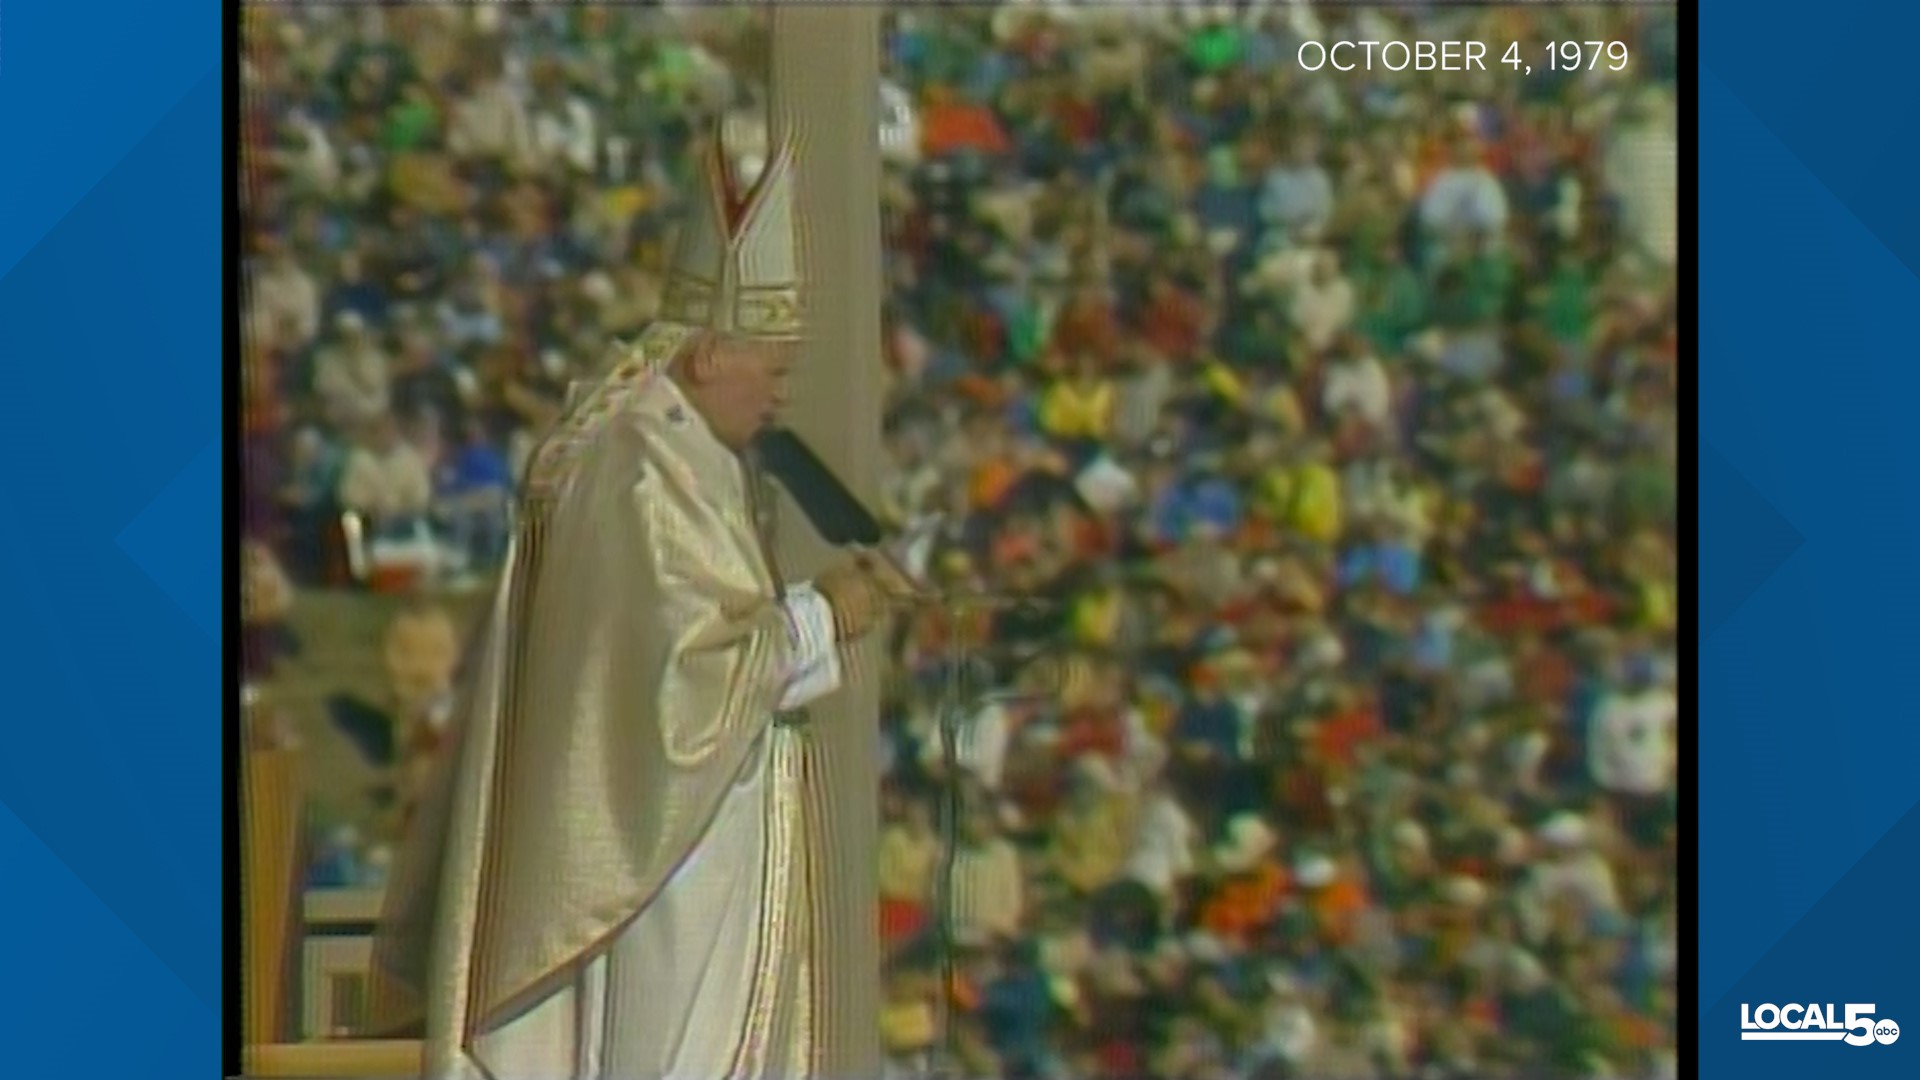 Saint Pope John Paul II made a historic trip to Iowa in October 1979, holding outdoor mass at Living History Farms.